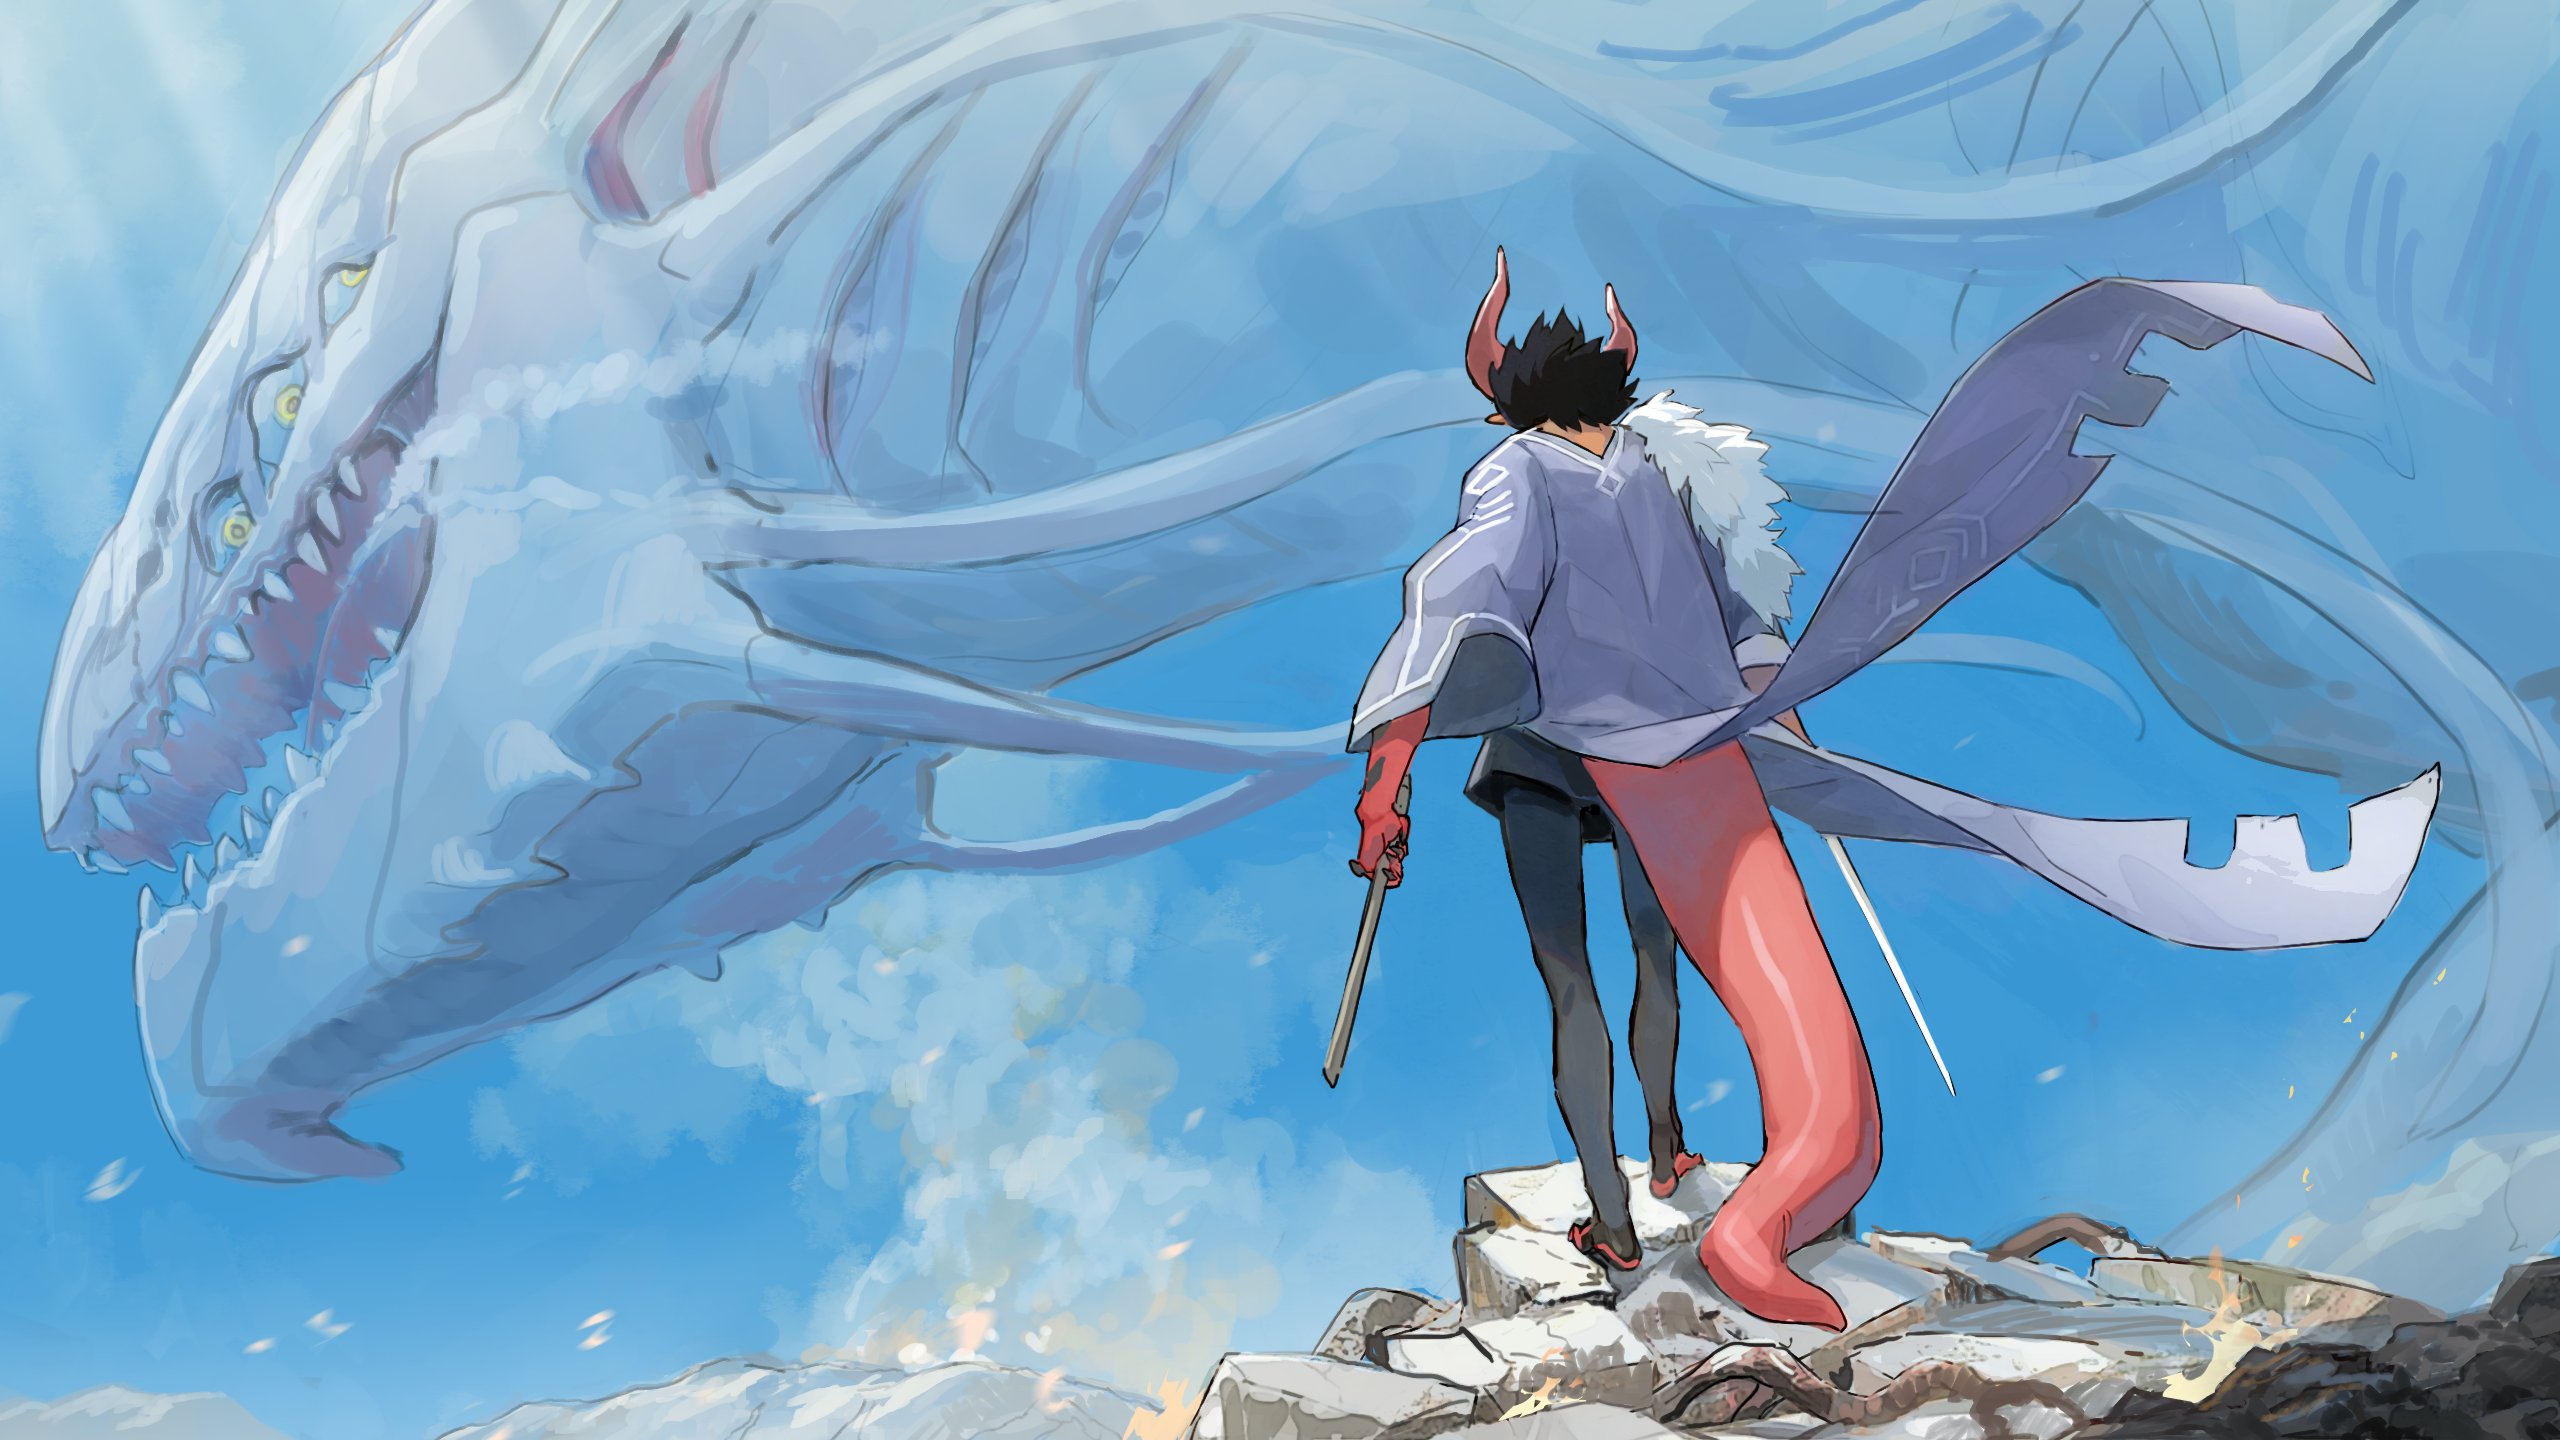 a beautiful anime style picture depicting a dragon and a demon character, from the Ether NFT project!